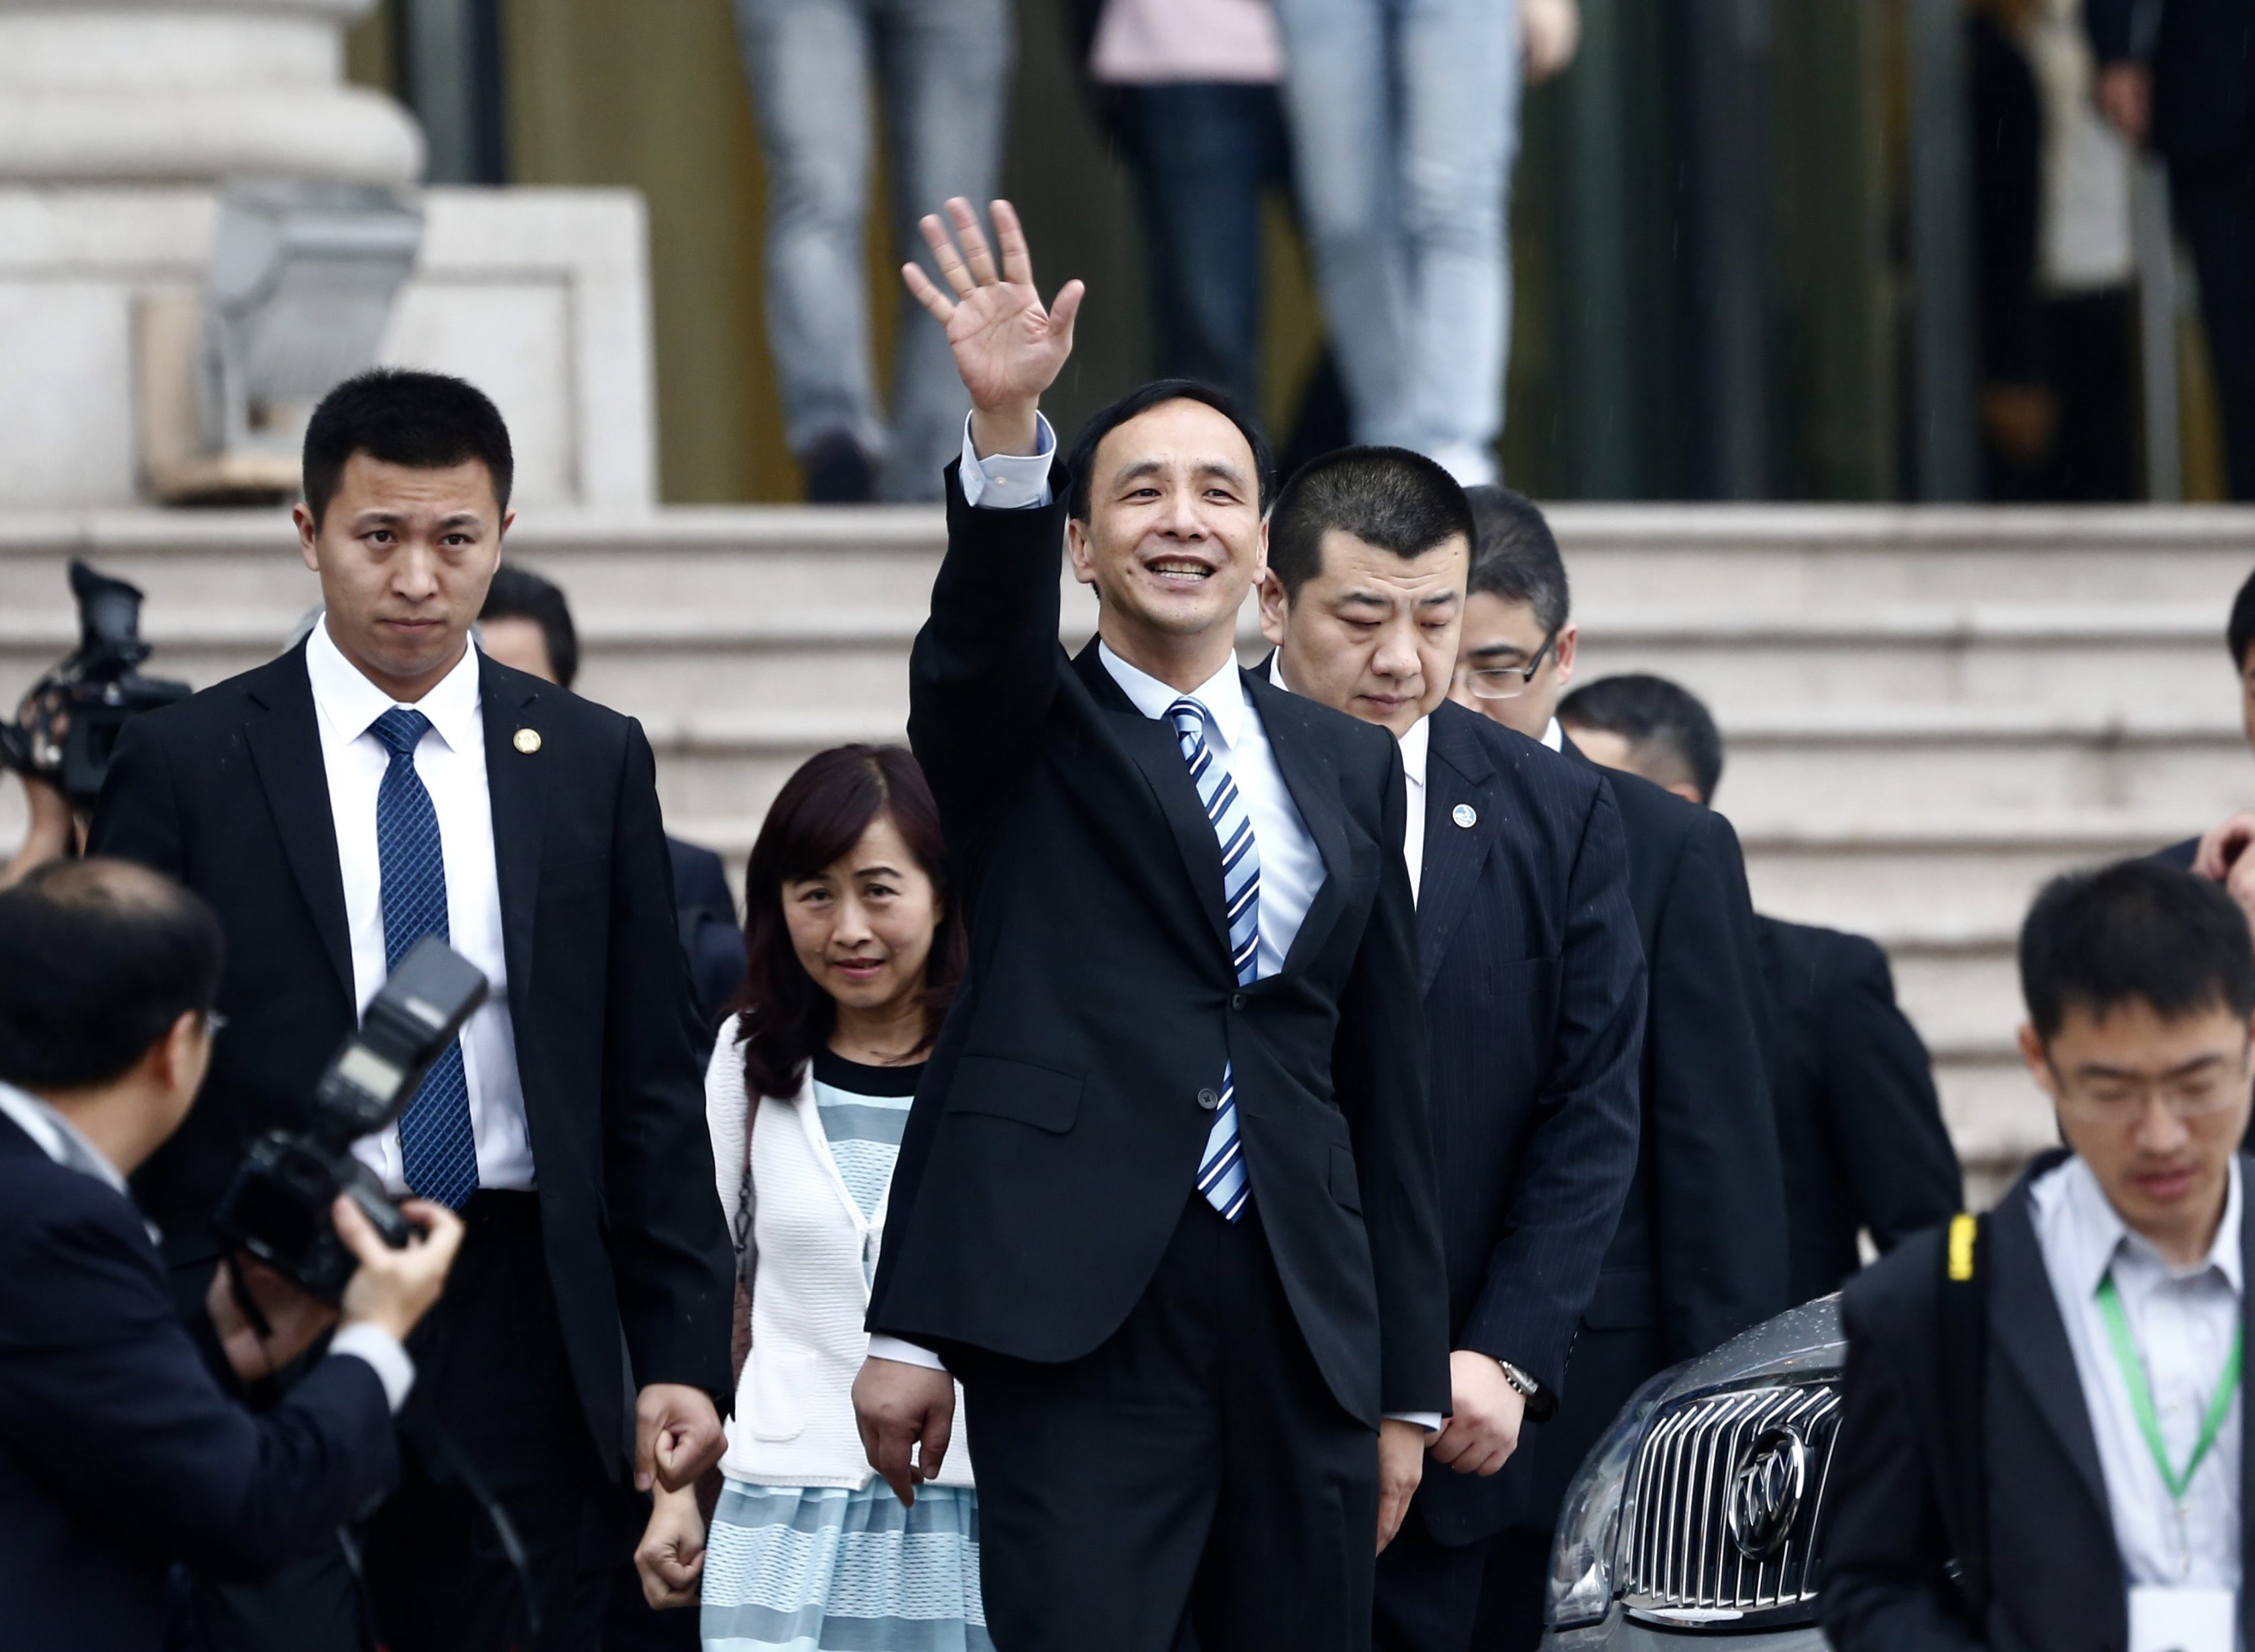 Current KMT chairman Eric Chu arriving in Shanghai this month. Photo: EPA